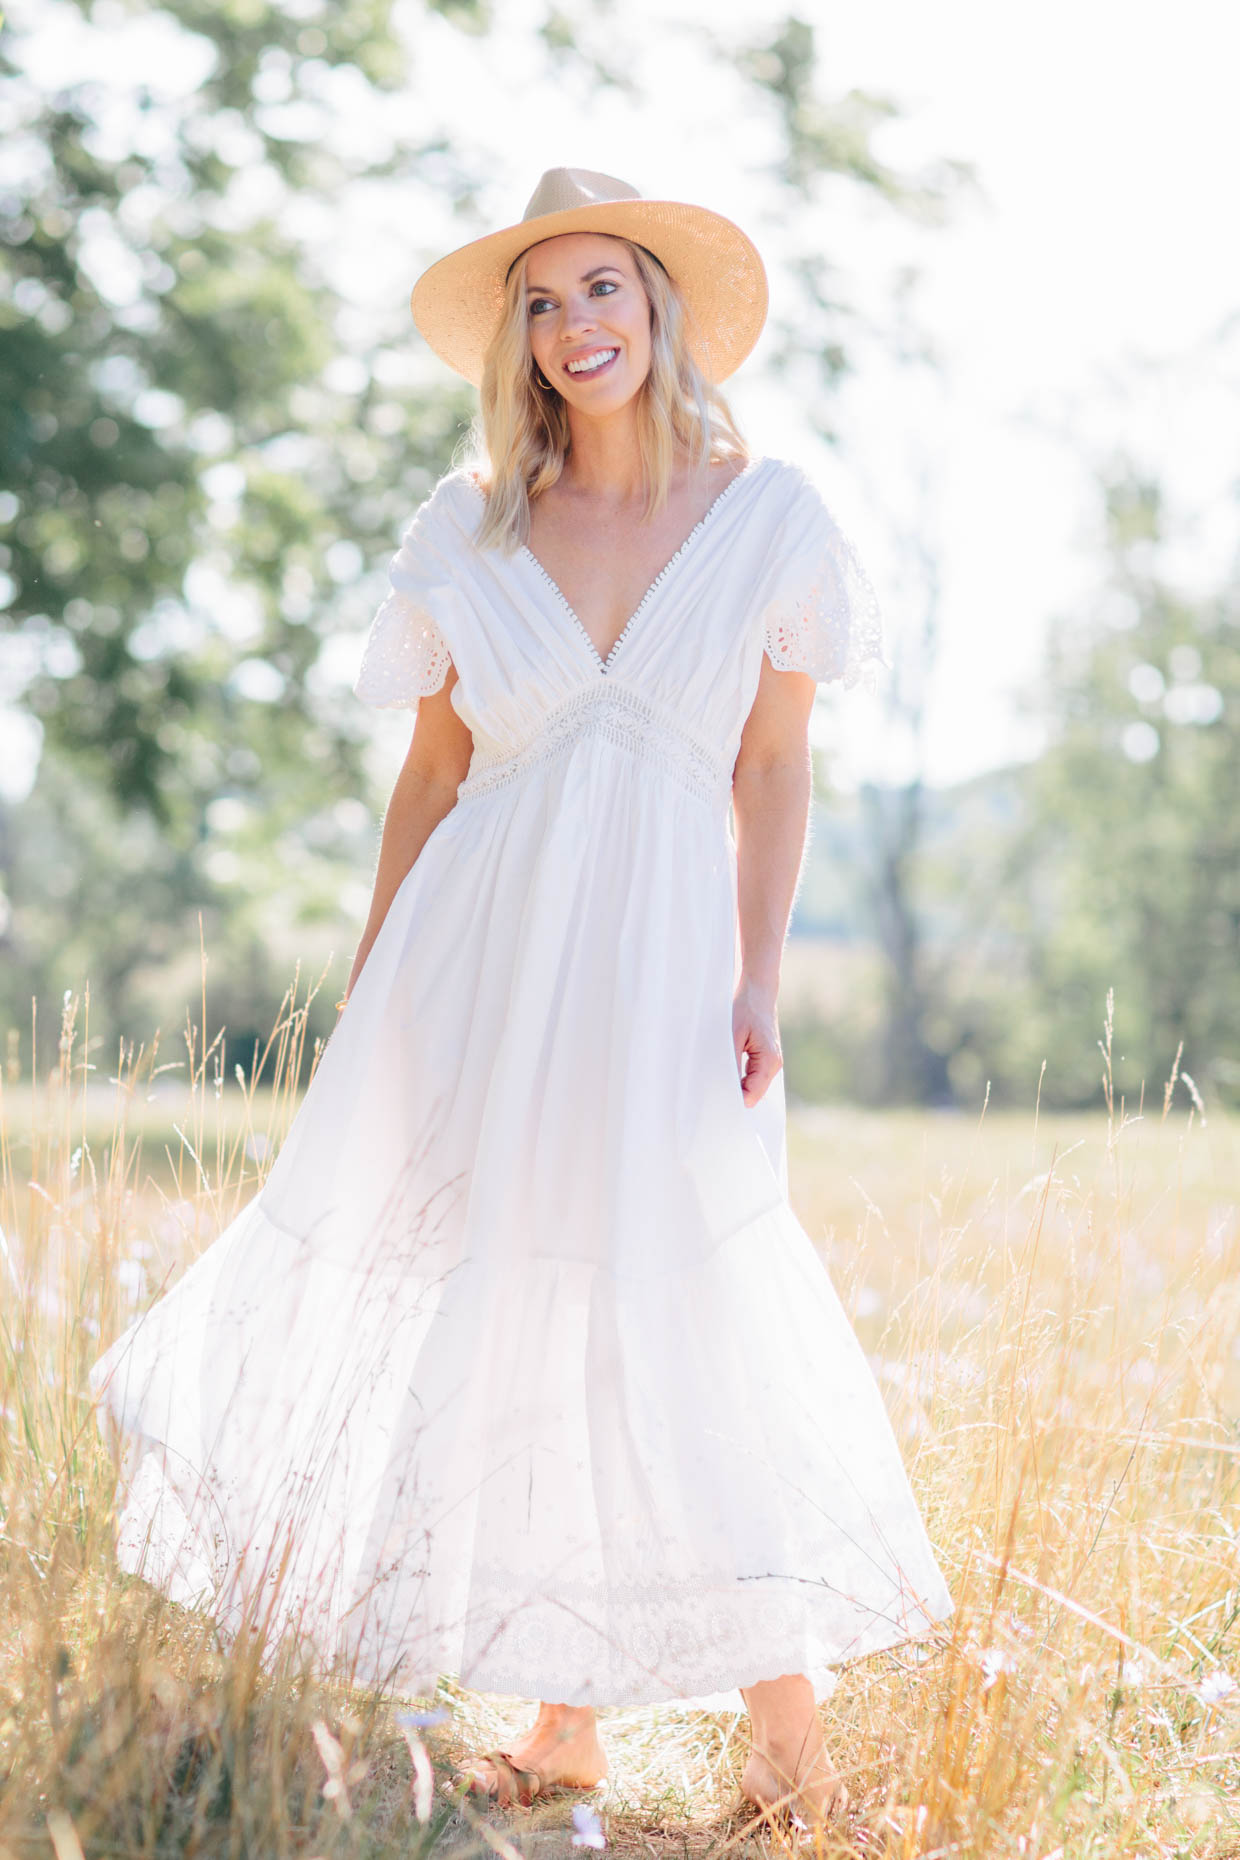 https://meagansmoda.com/wp-content/uploads/2020/07/Meagan-Brandon-fashion-blogger-of-Meagans-Moda-wears-Chicwish-white-maxi-dress-with-straw-hat-white-dress-summer-outfit.jpg